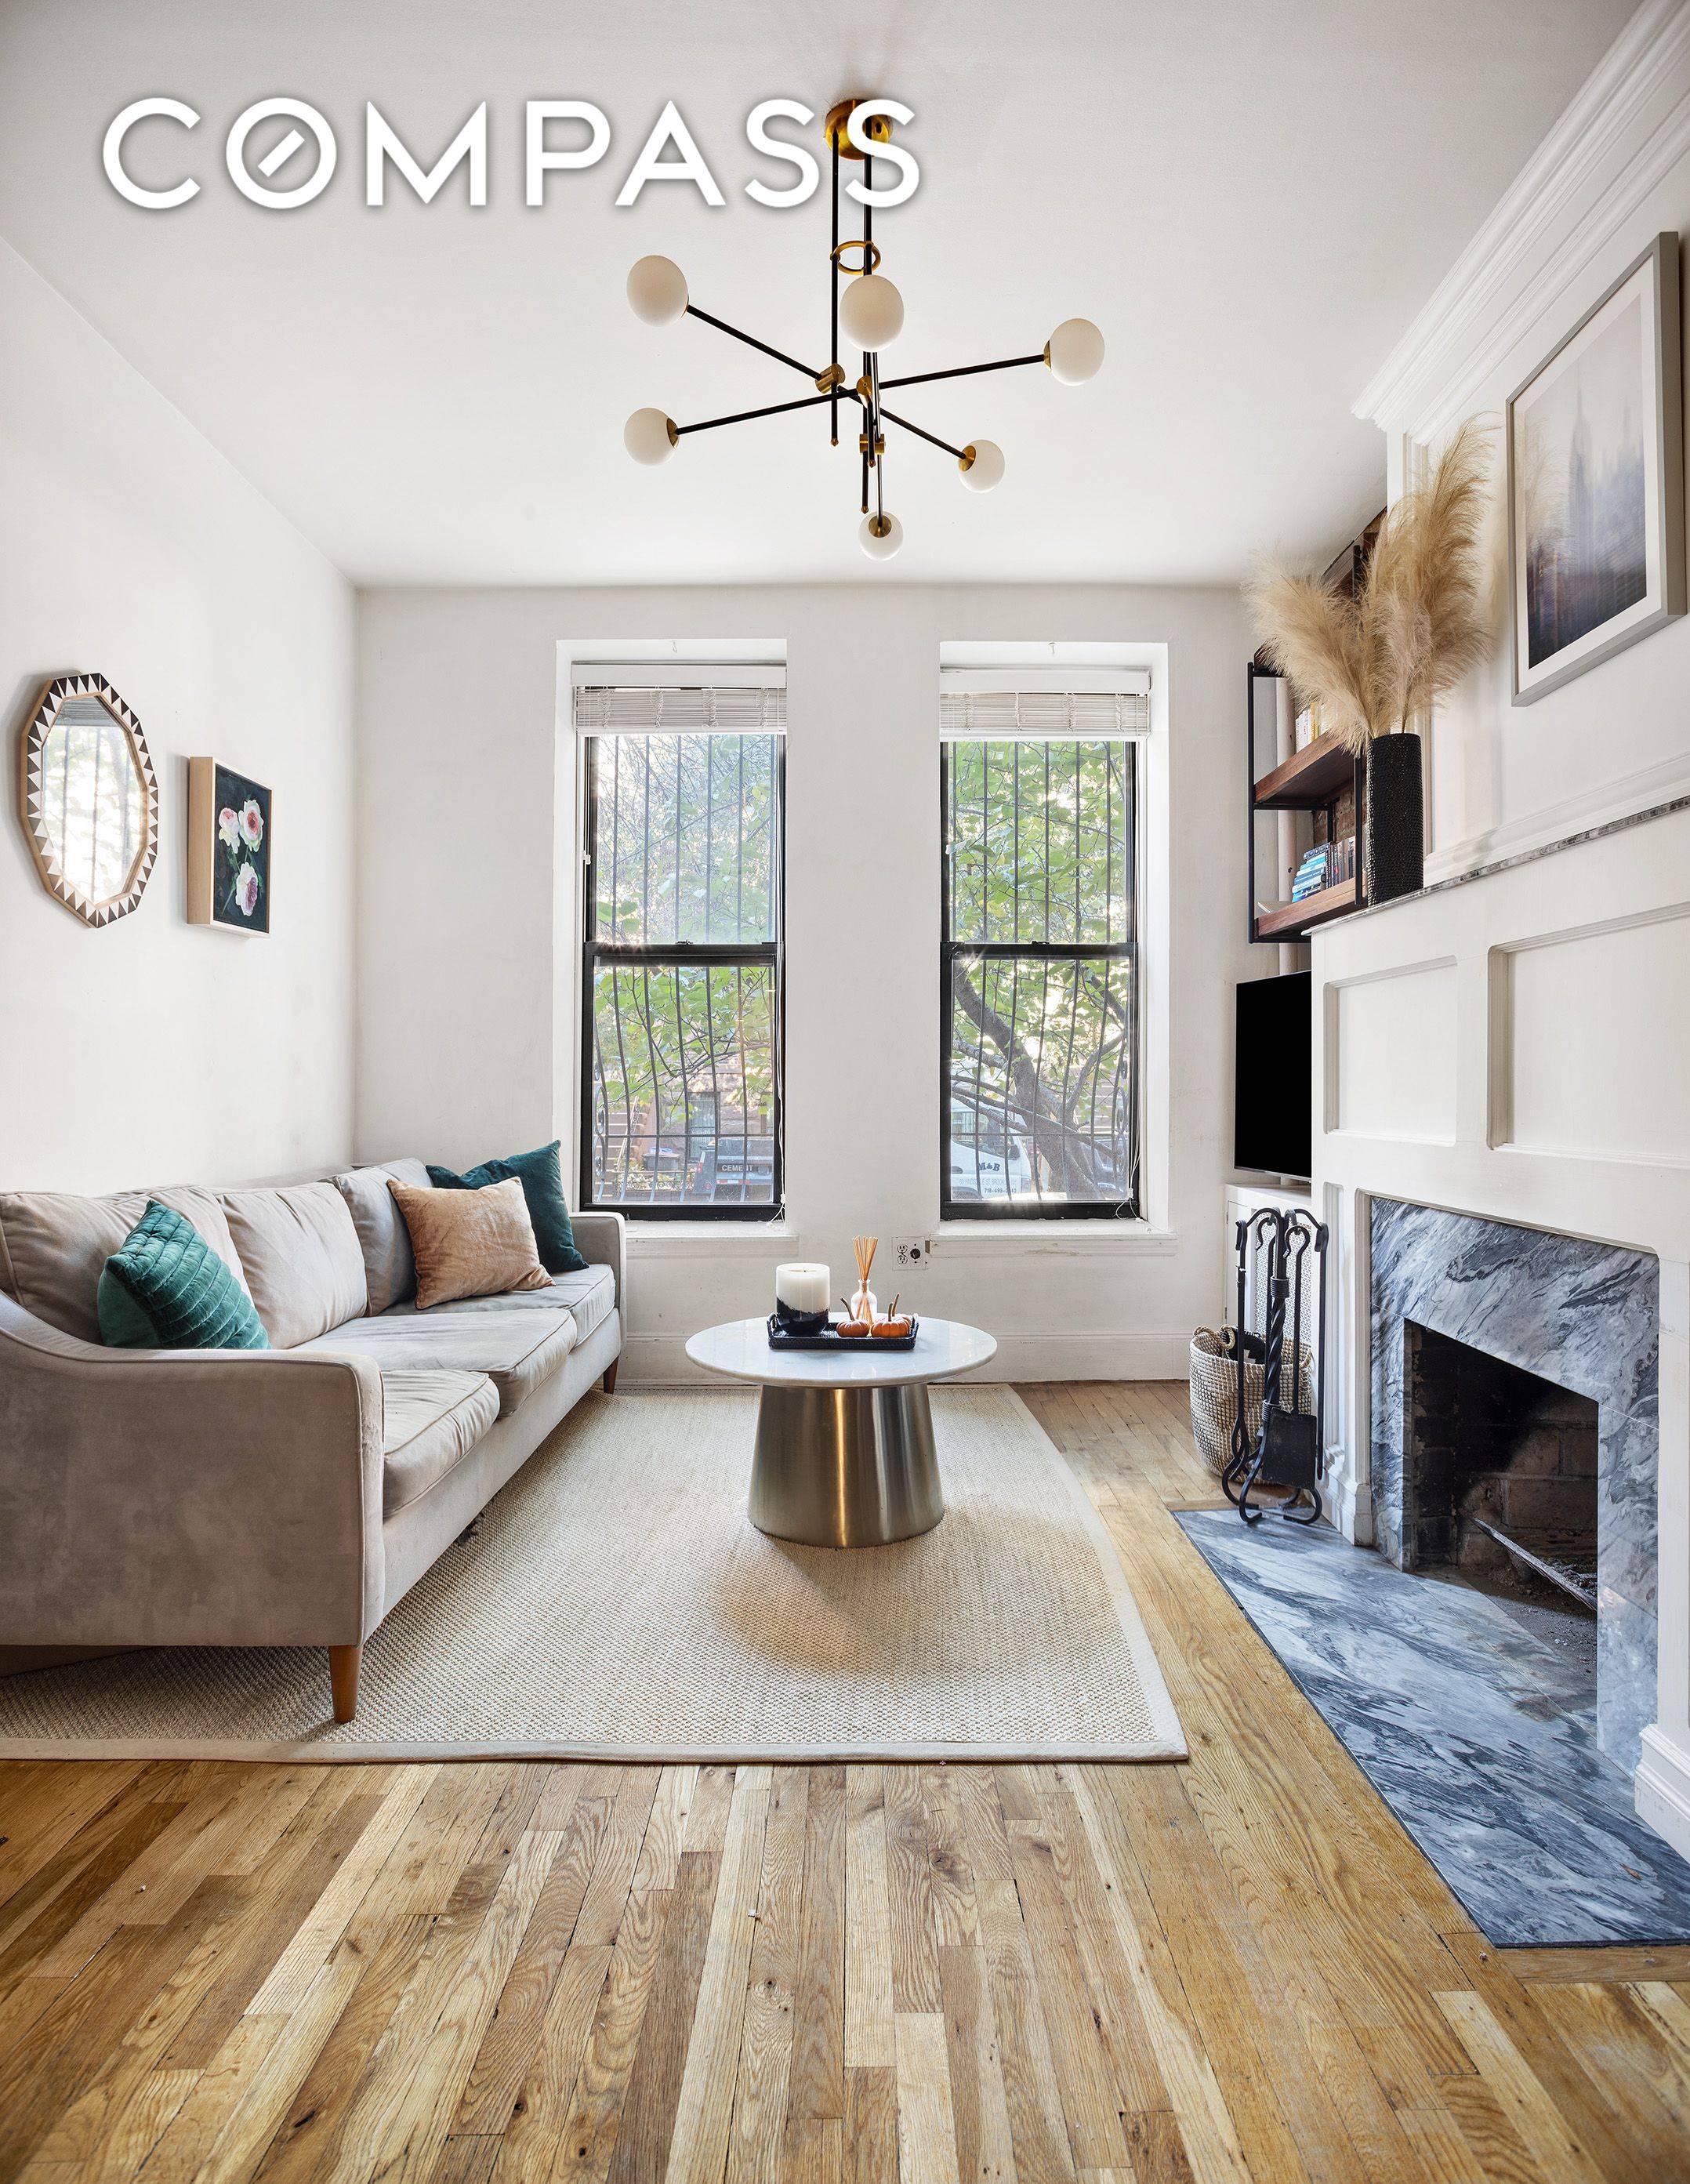 Just Listed For Rent ! 656 Carroll 1L has all the Park Slope charm you've been looking for !